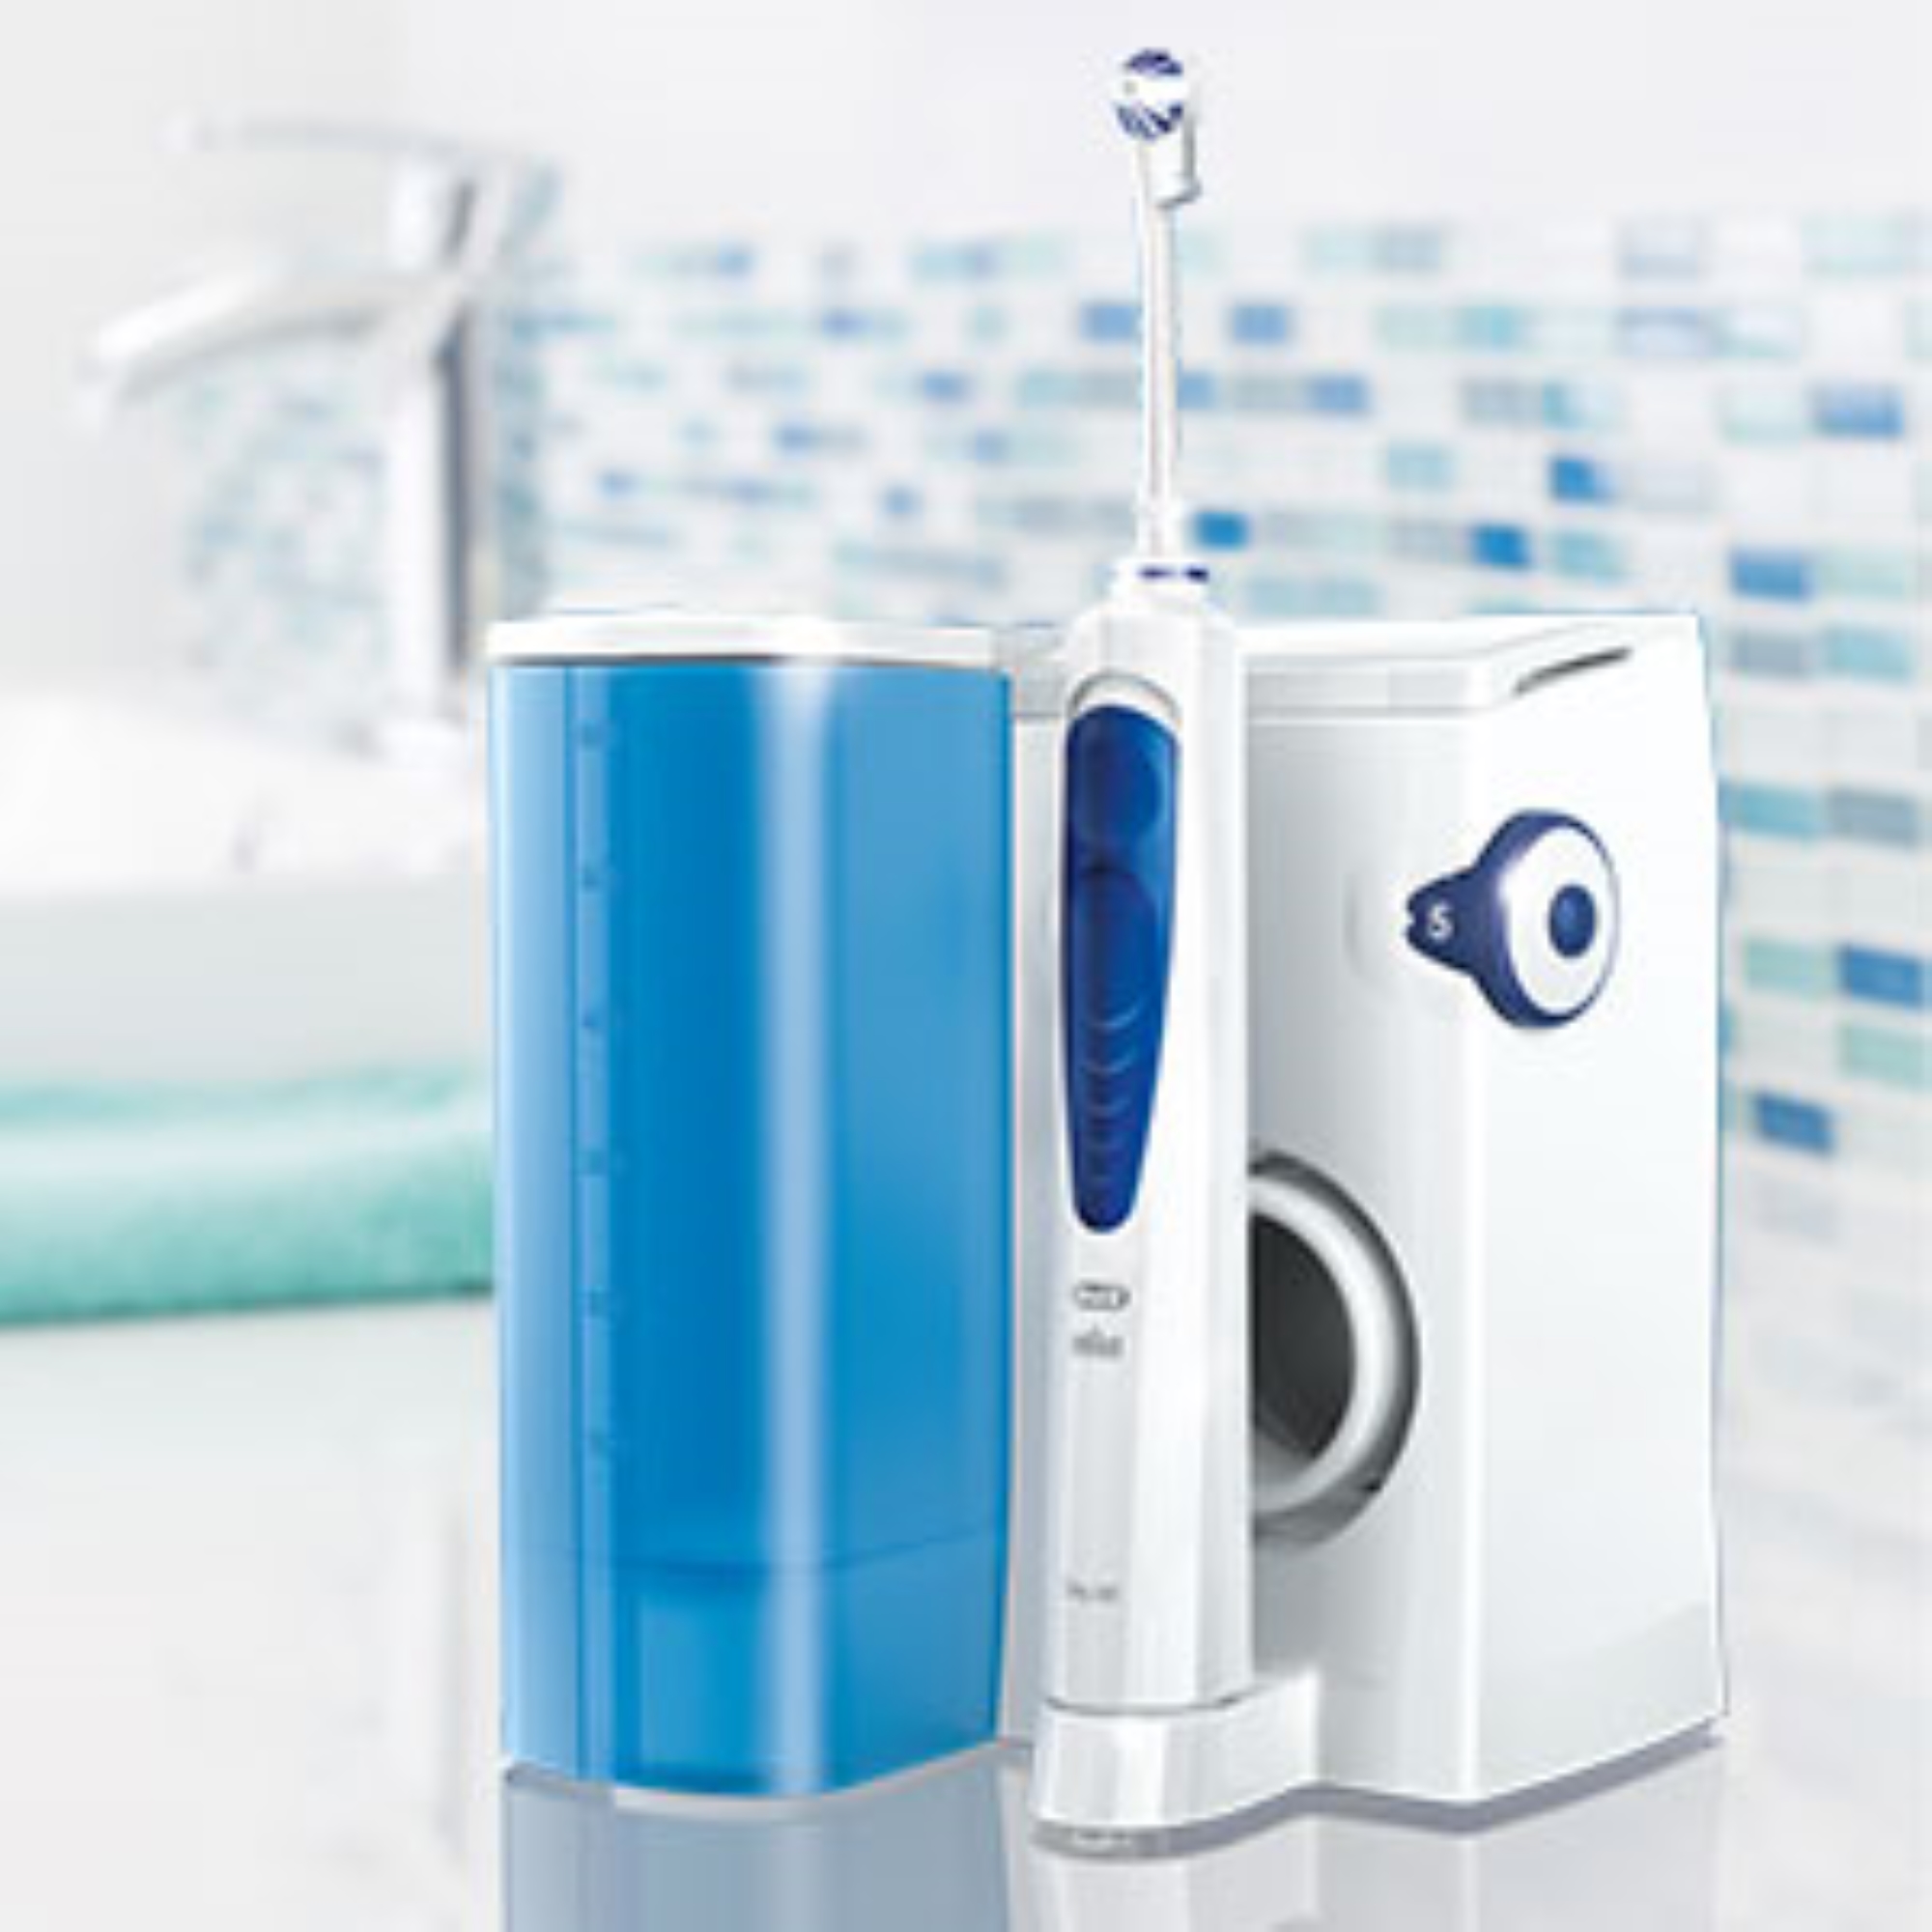 Oral B best ever clean with revolutionay Magnetic iO Technology 